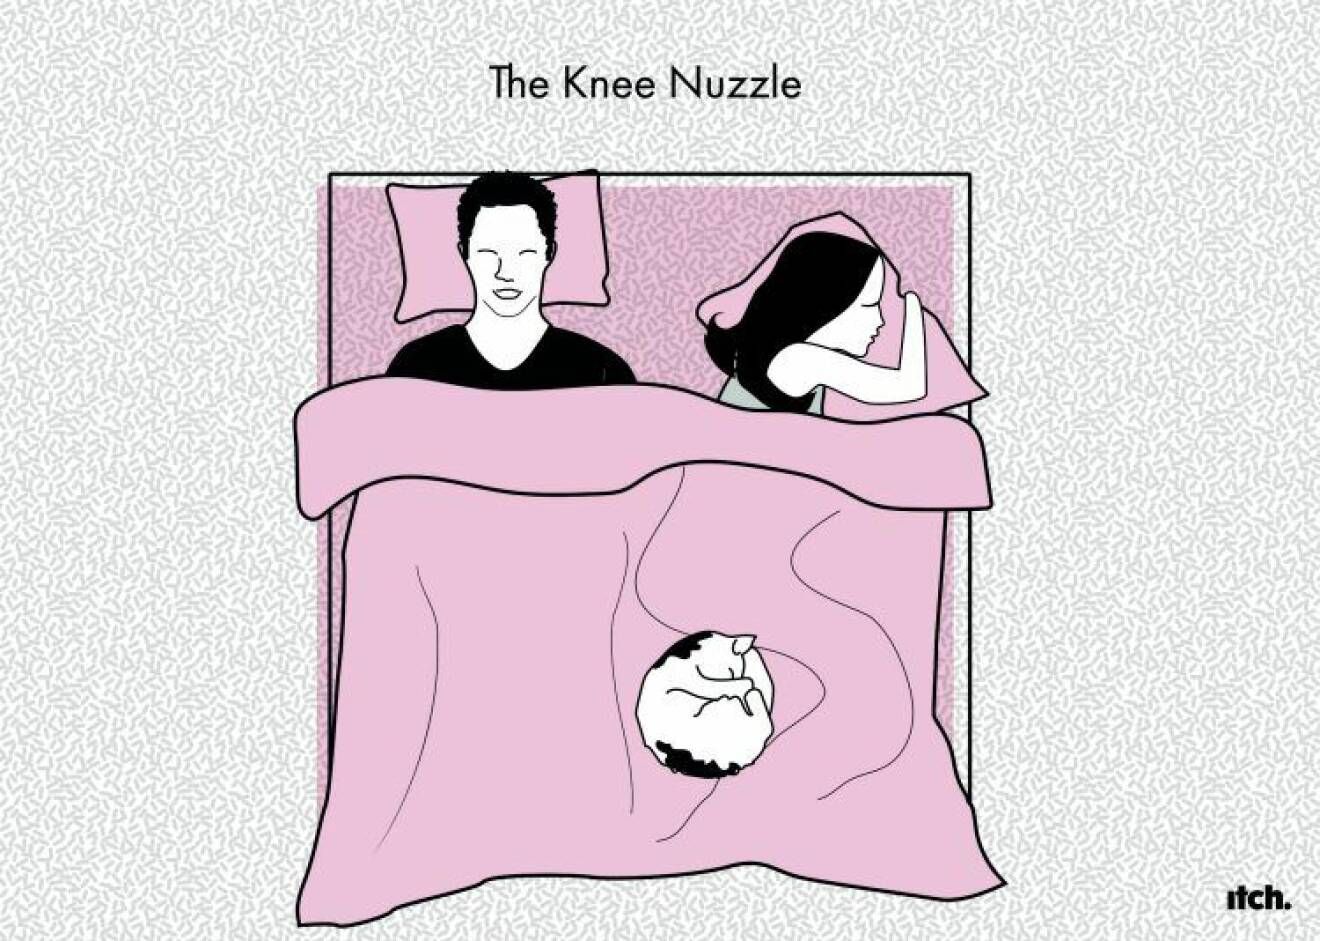 The Knee Nuzzle